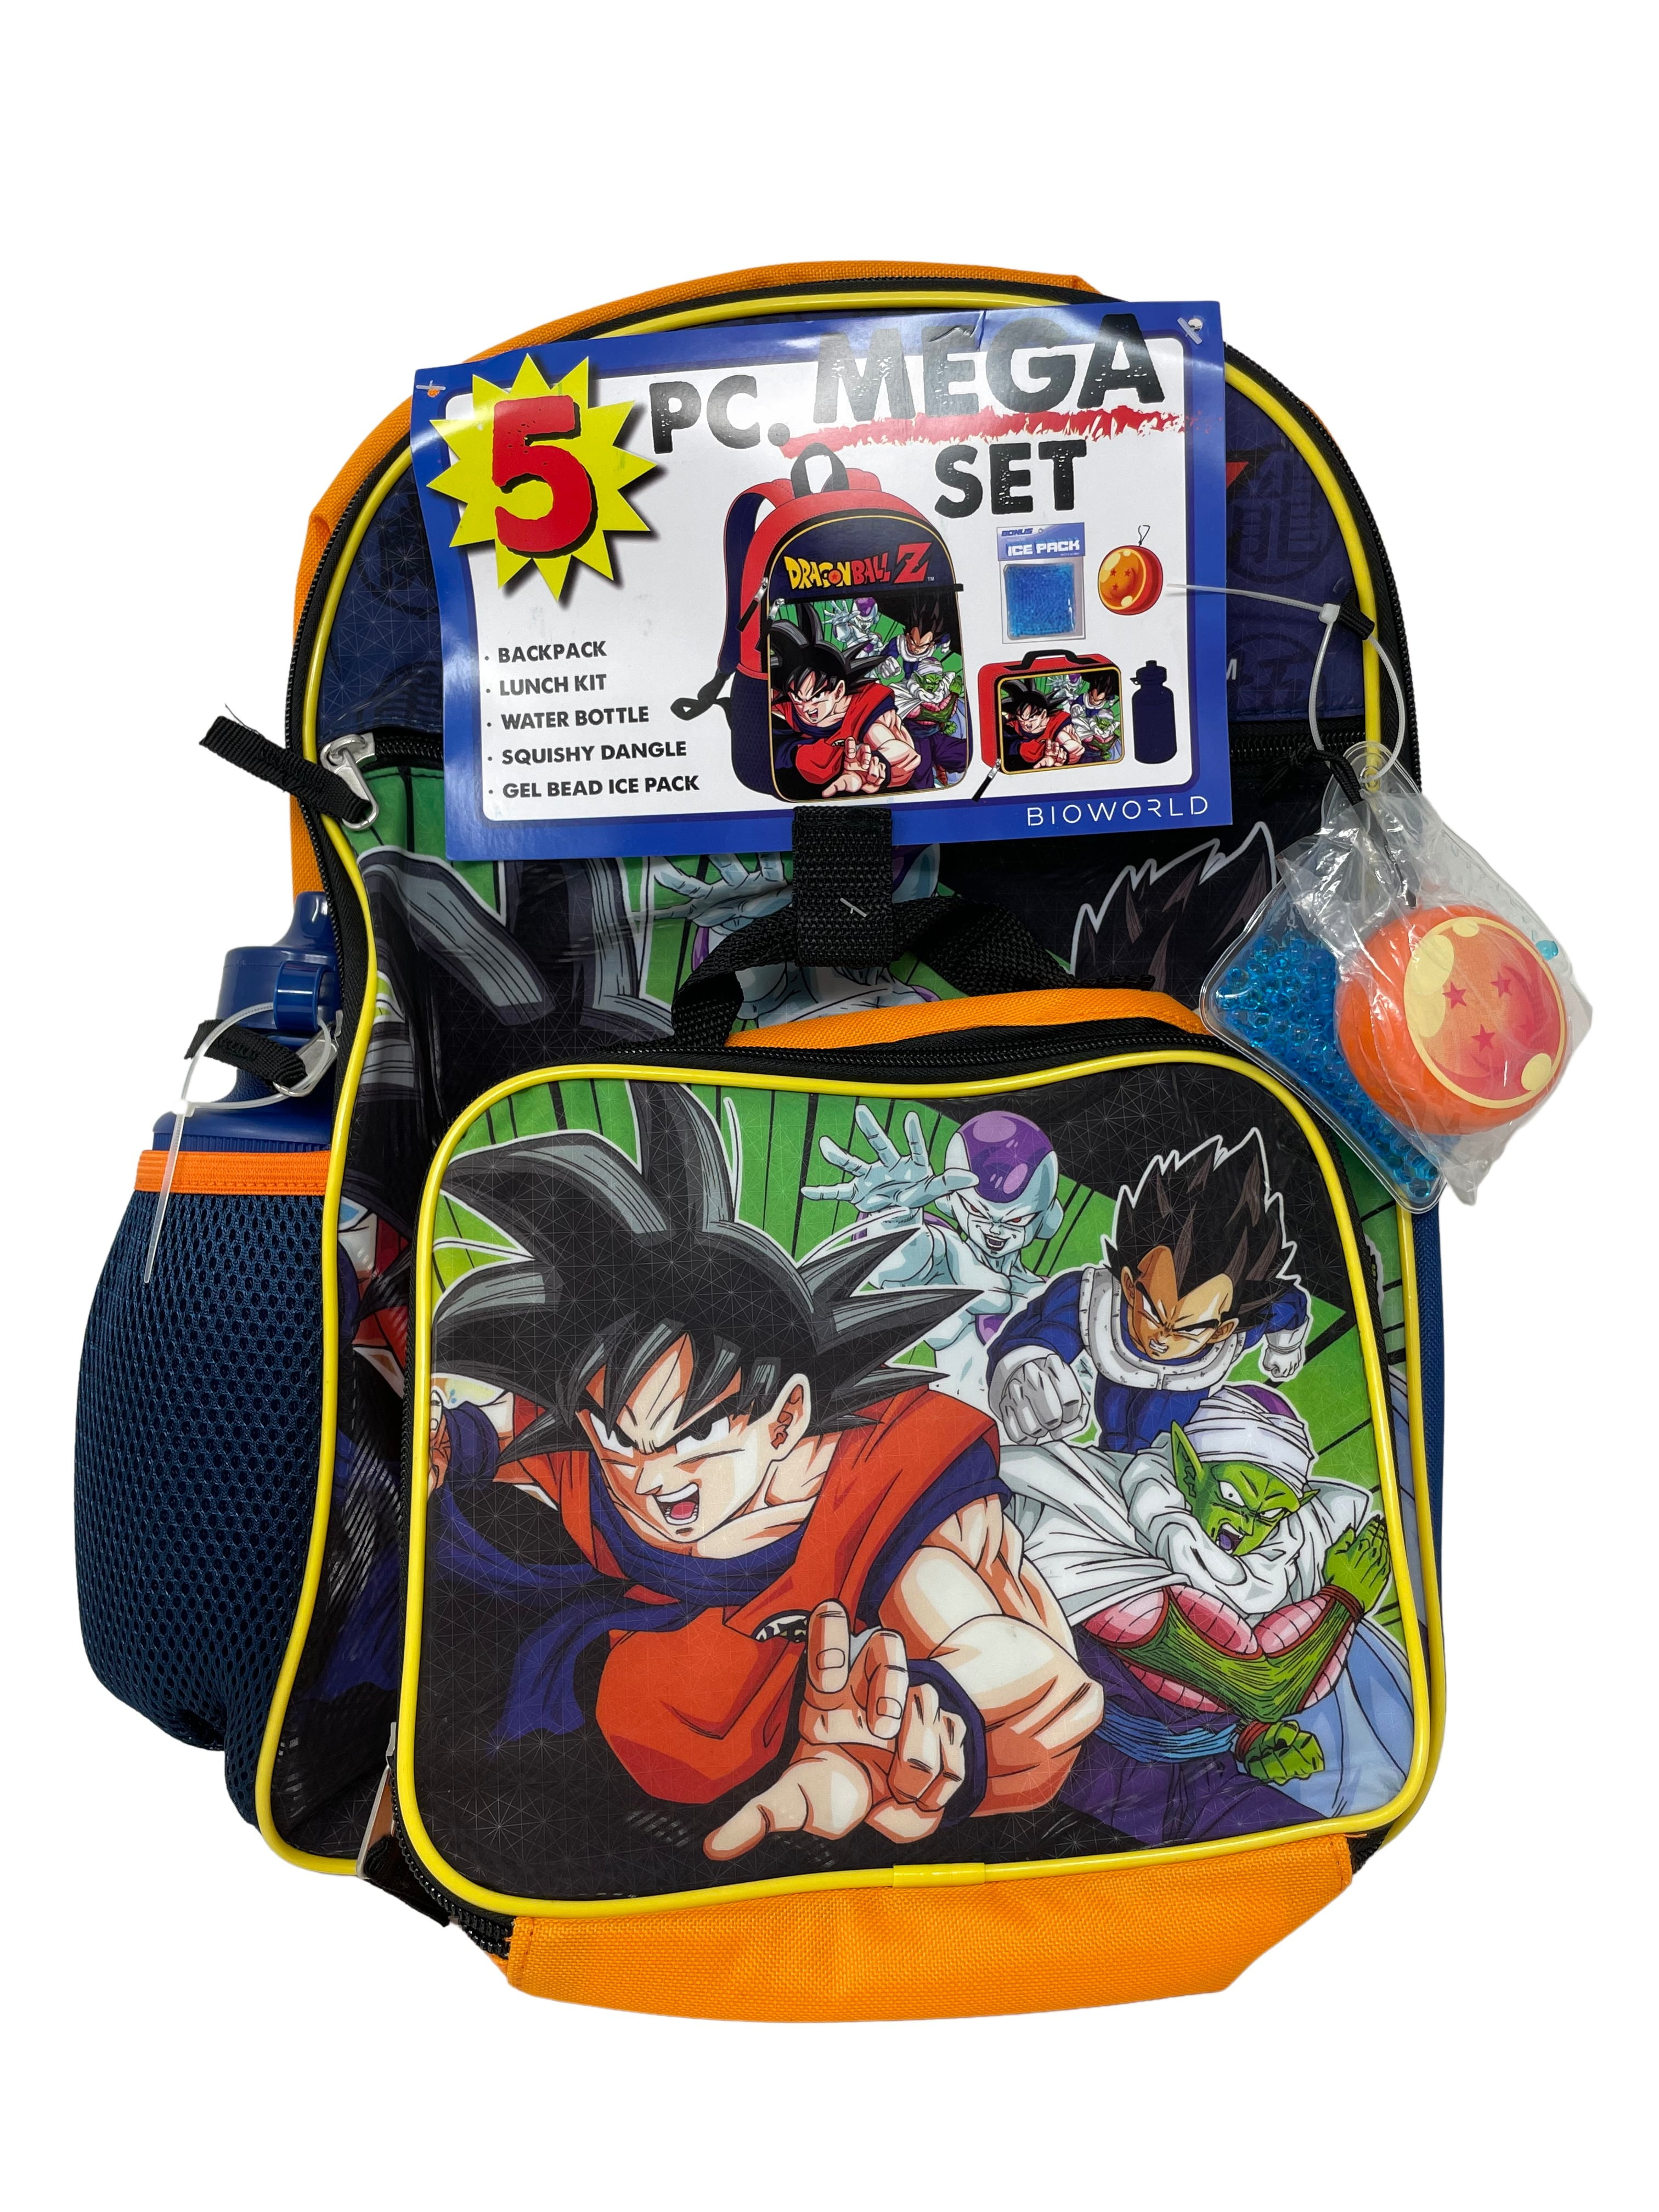 3Pcs Anime Dragon Ball Z Backpack Mini Bags Pencil Bags School Students Gifts 